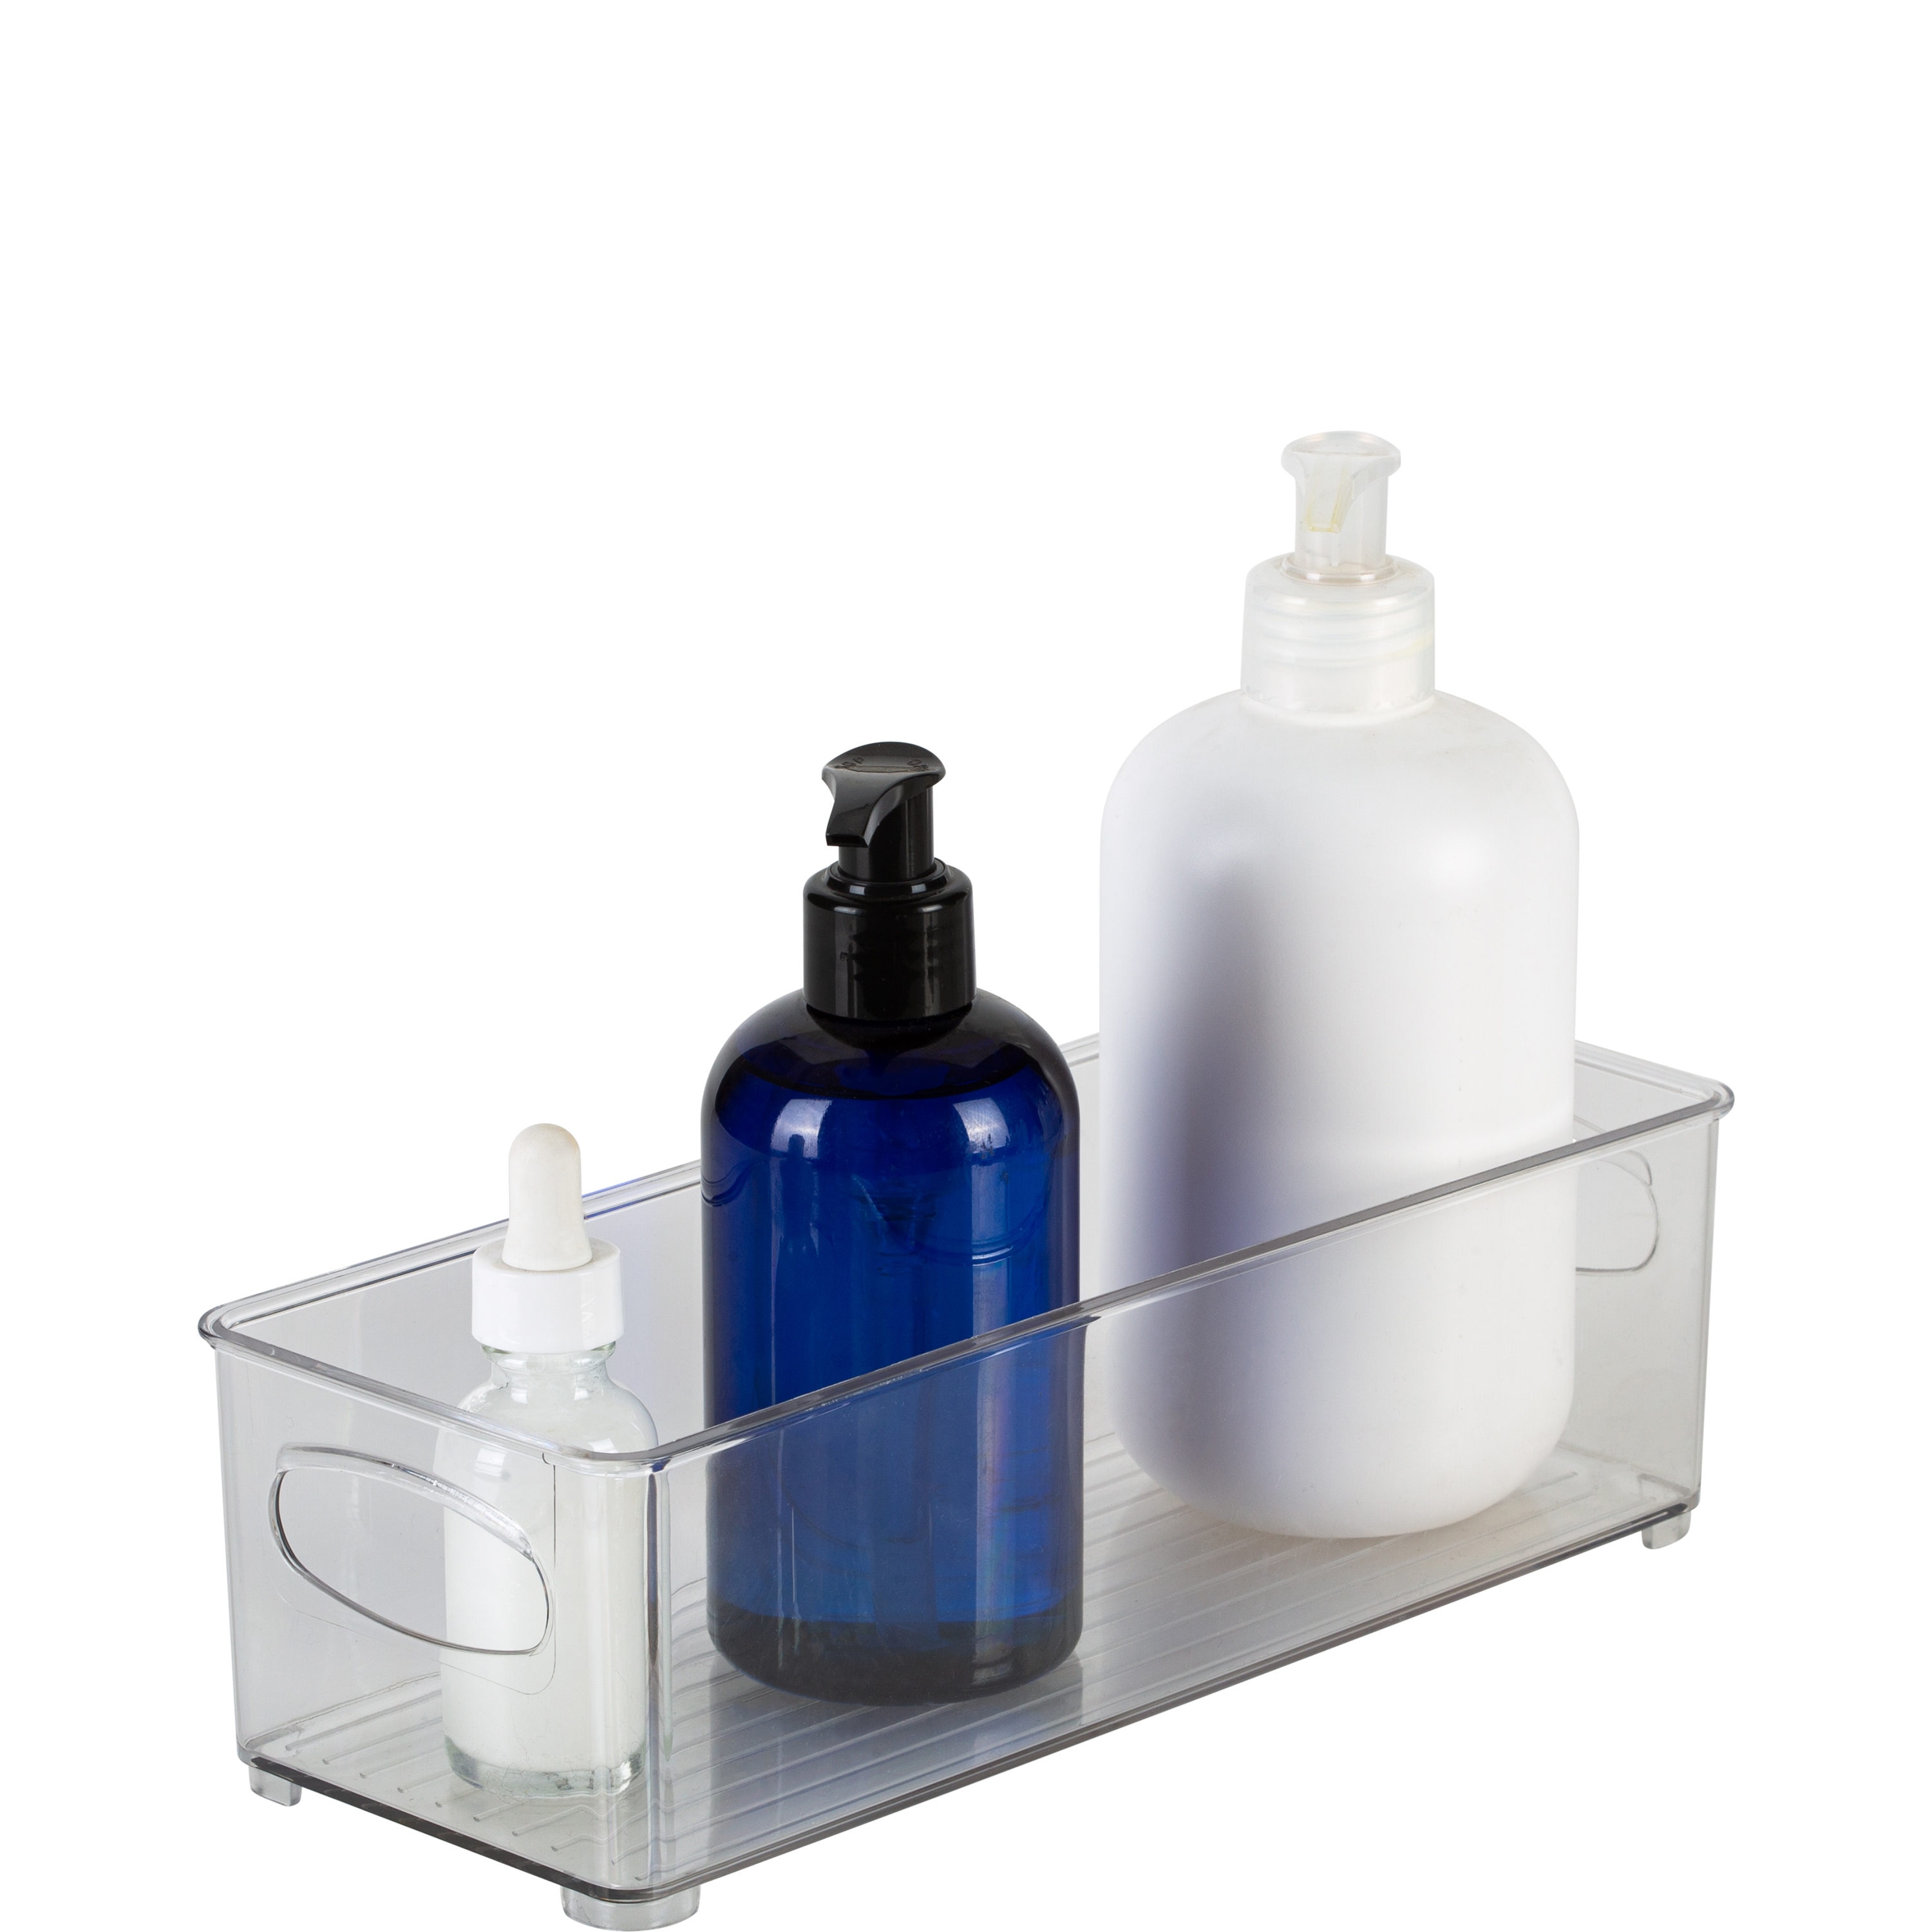 Small 0.3 litre clear plastic container for a cleaner workbench